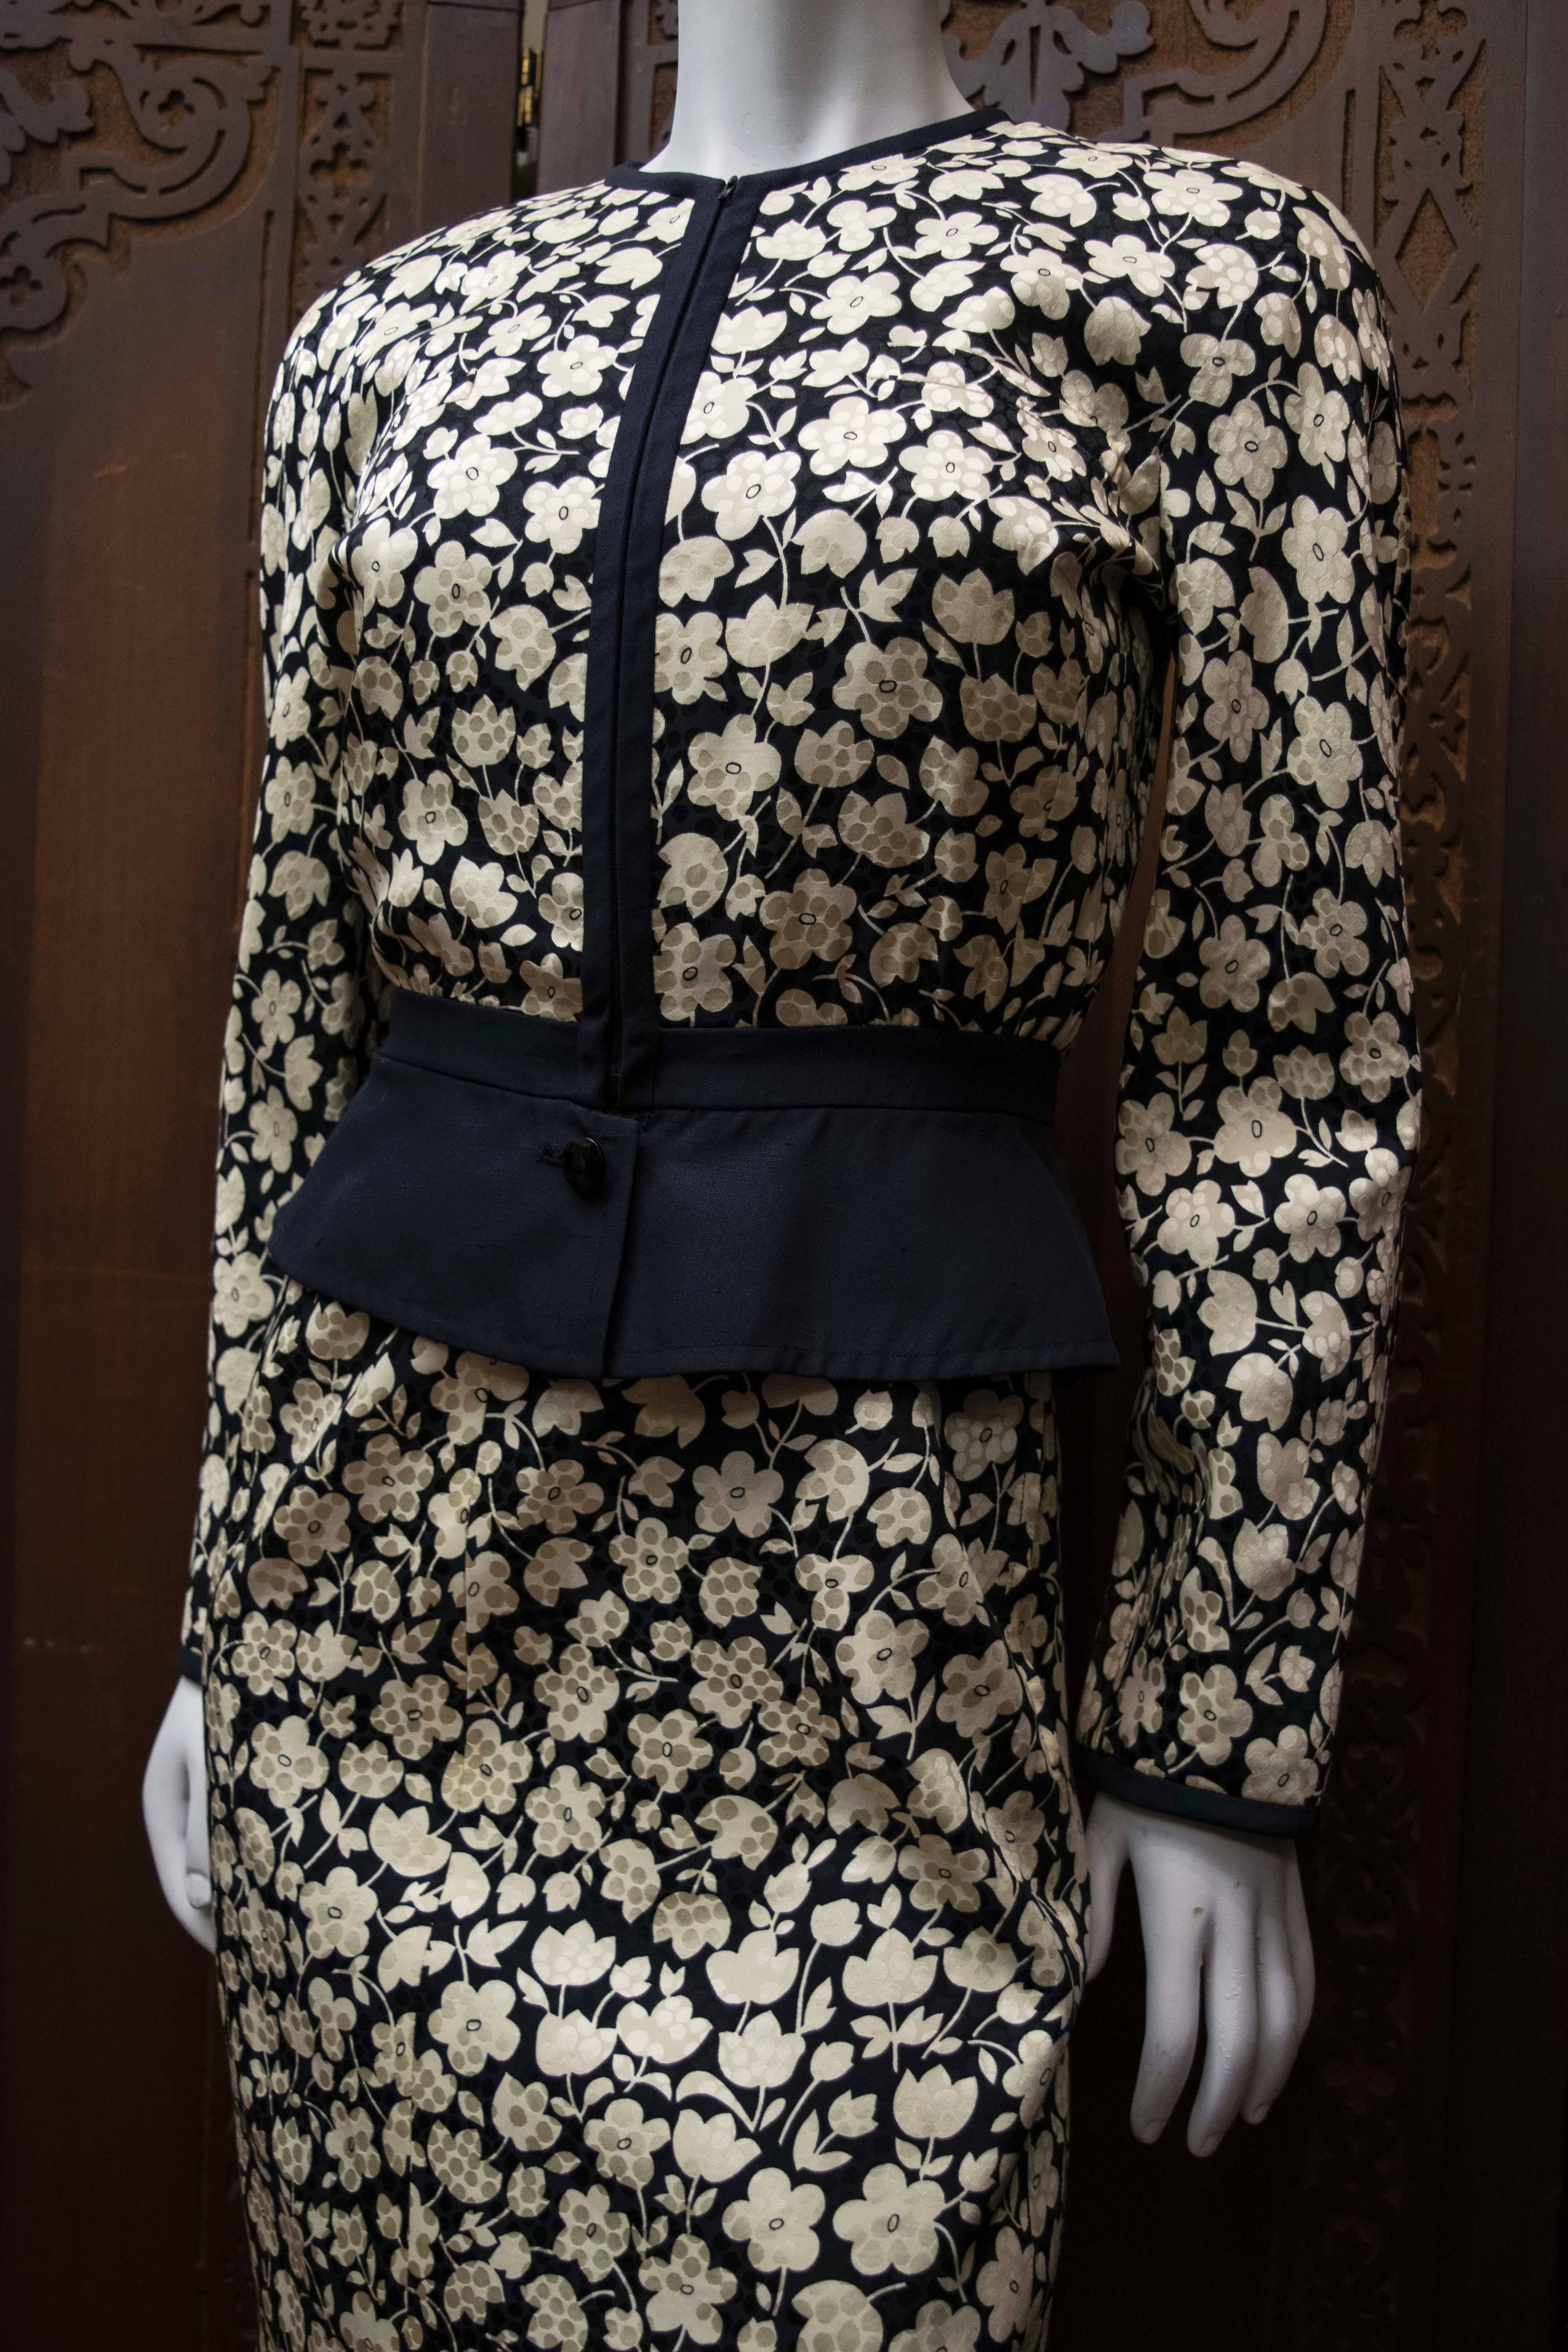 1980s Valentino Floral Dress and Jacket

Beautiful black and cream floral dress and jacket. Each piece is wonderful by themselves, and great as an ensemble. 

B 34
W 28
H 40
L 32